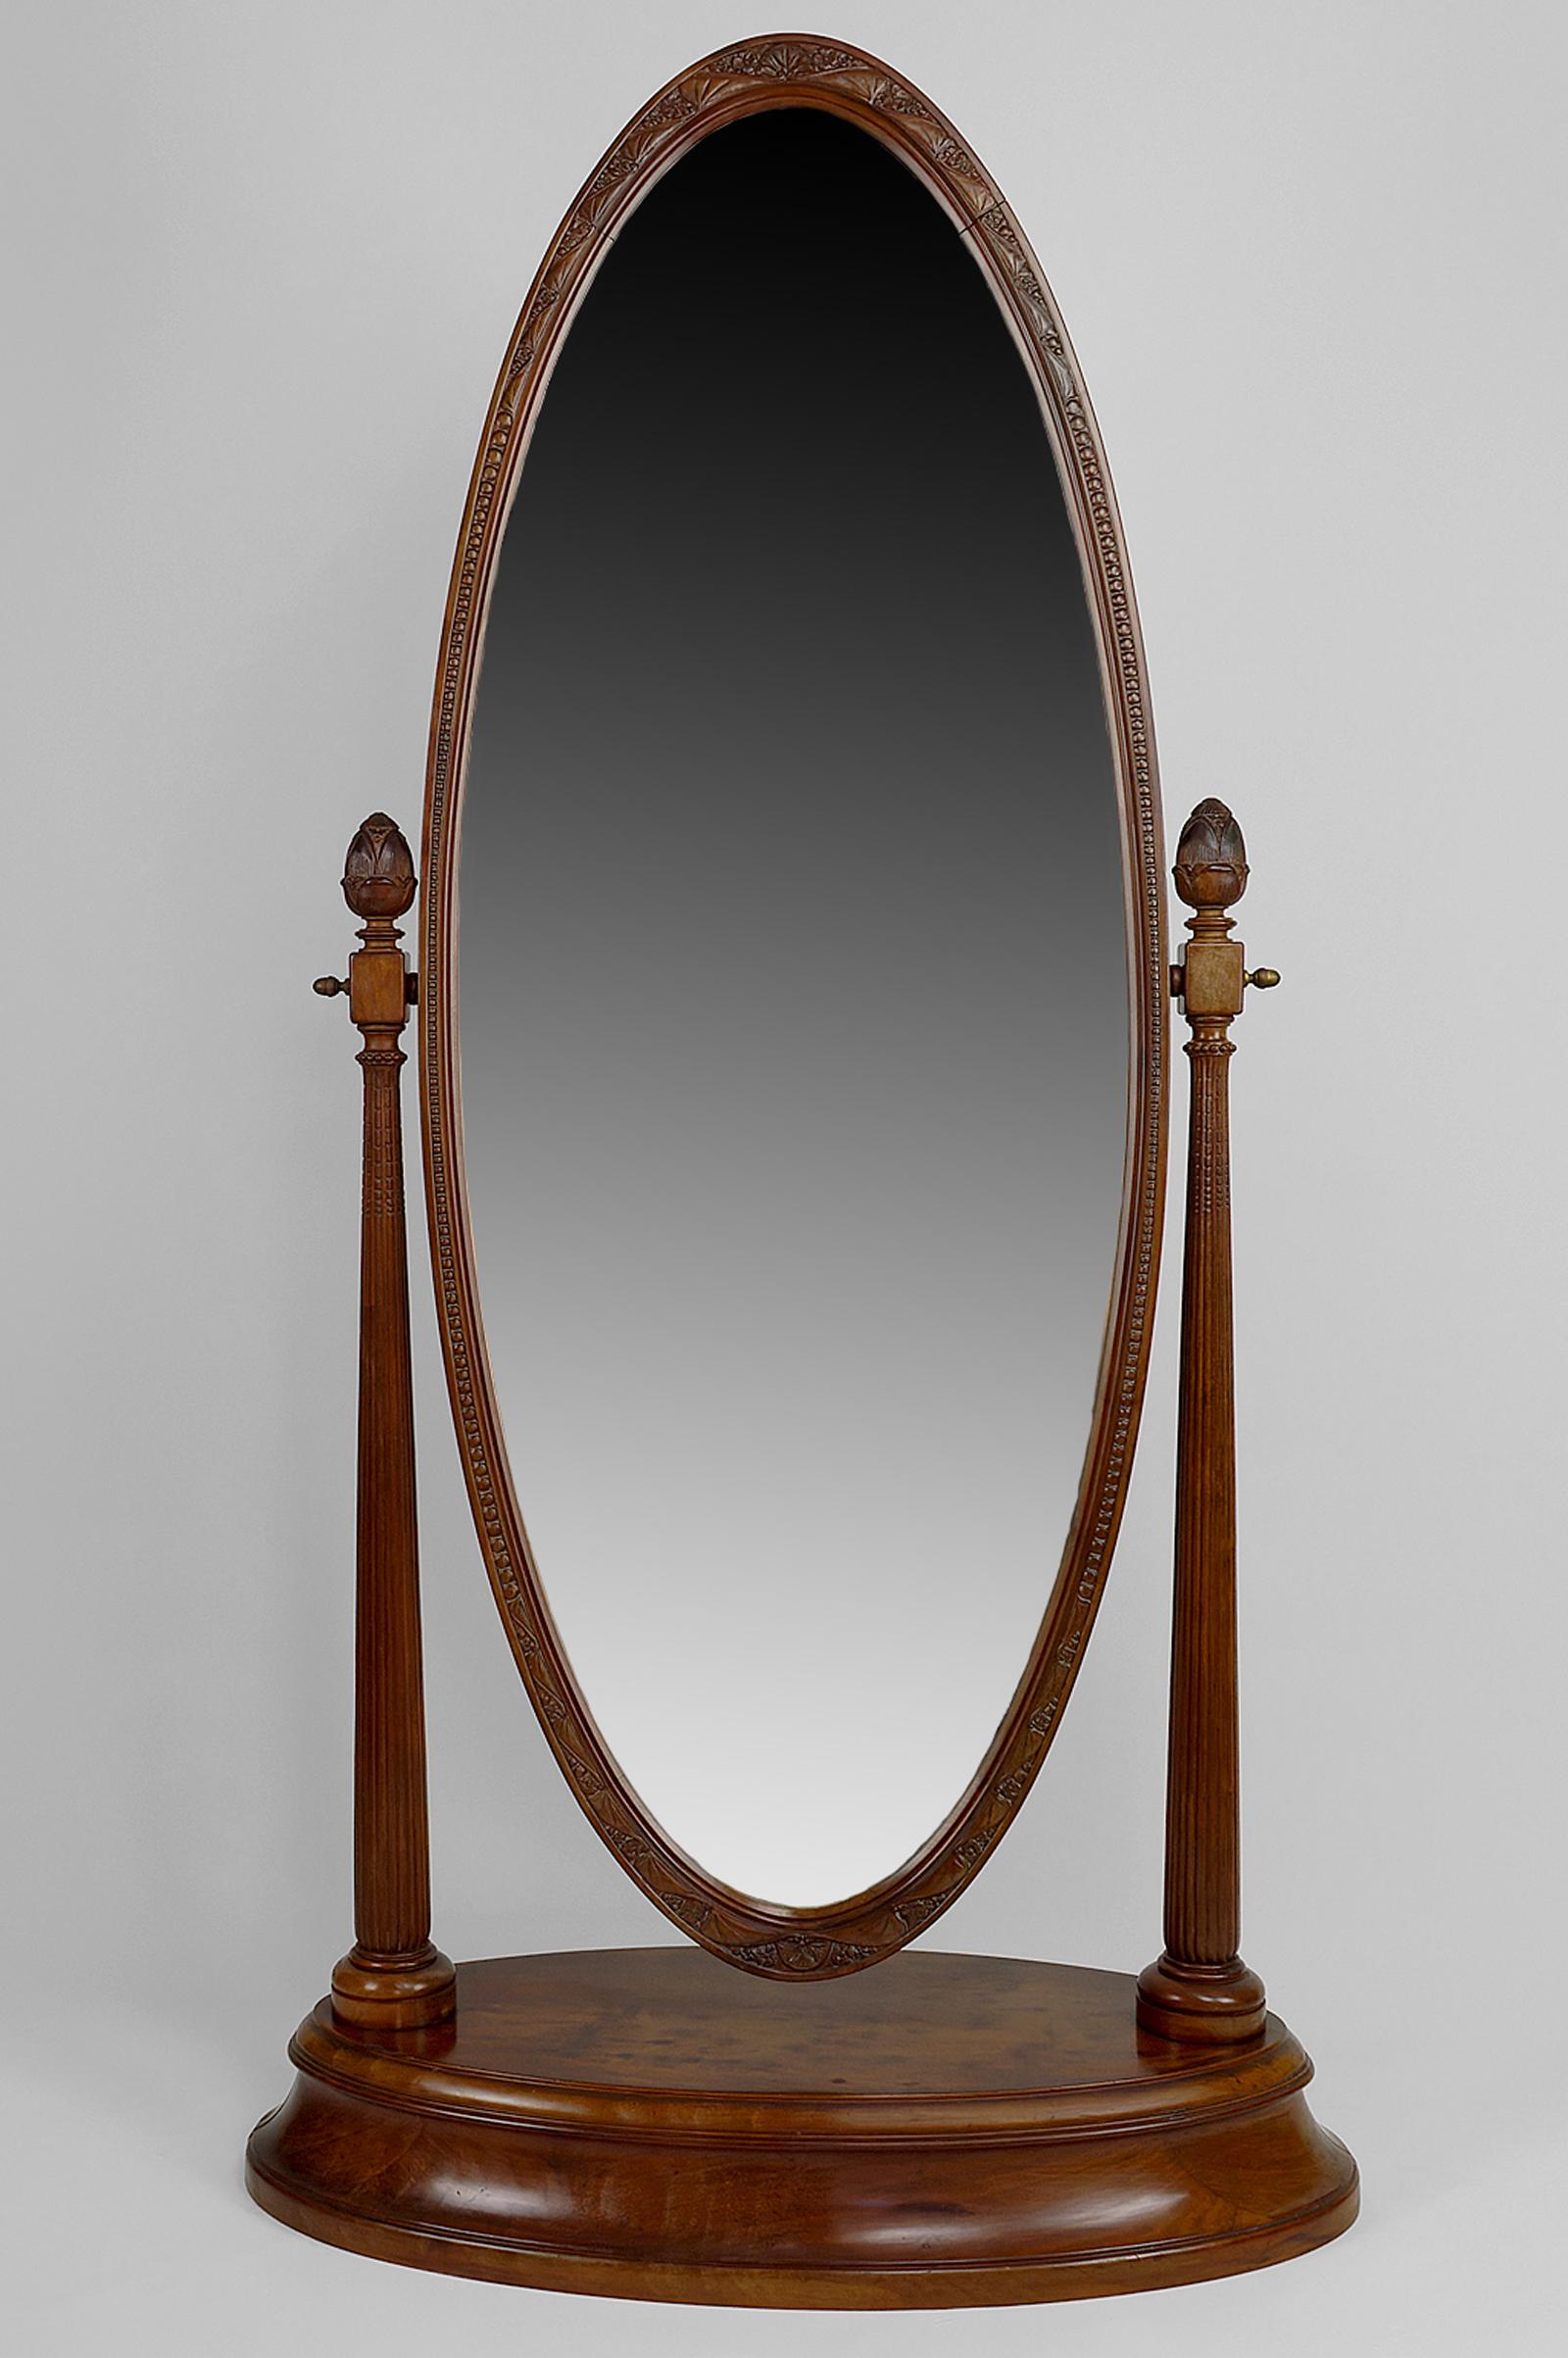 Gorgeous mahogany psyche divided into three parts:

- a large beveled oval mirror and its solid wood frame sculpted with flowers and rows of pearls;

- two fluted uprights / pilasters ending in stylized flowers (à la MacIntosch?);

- an oval